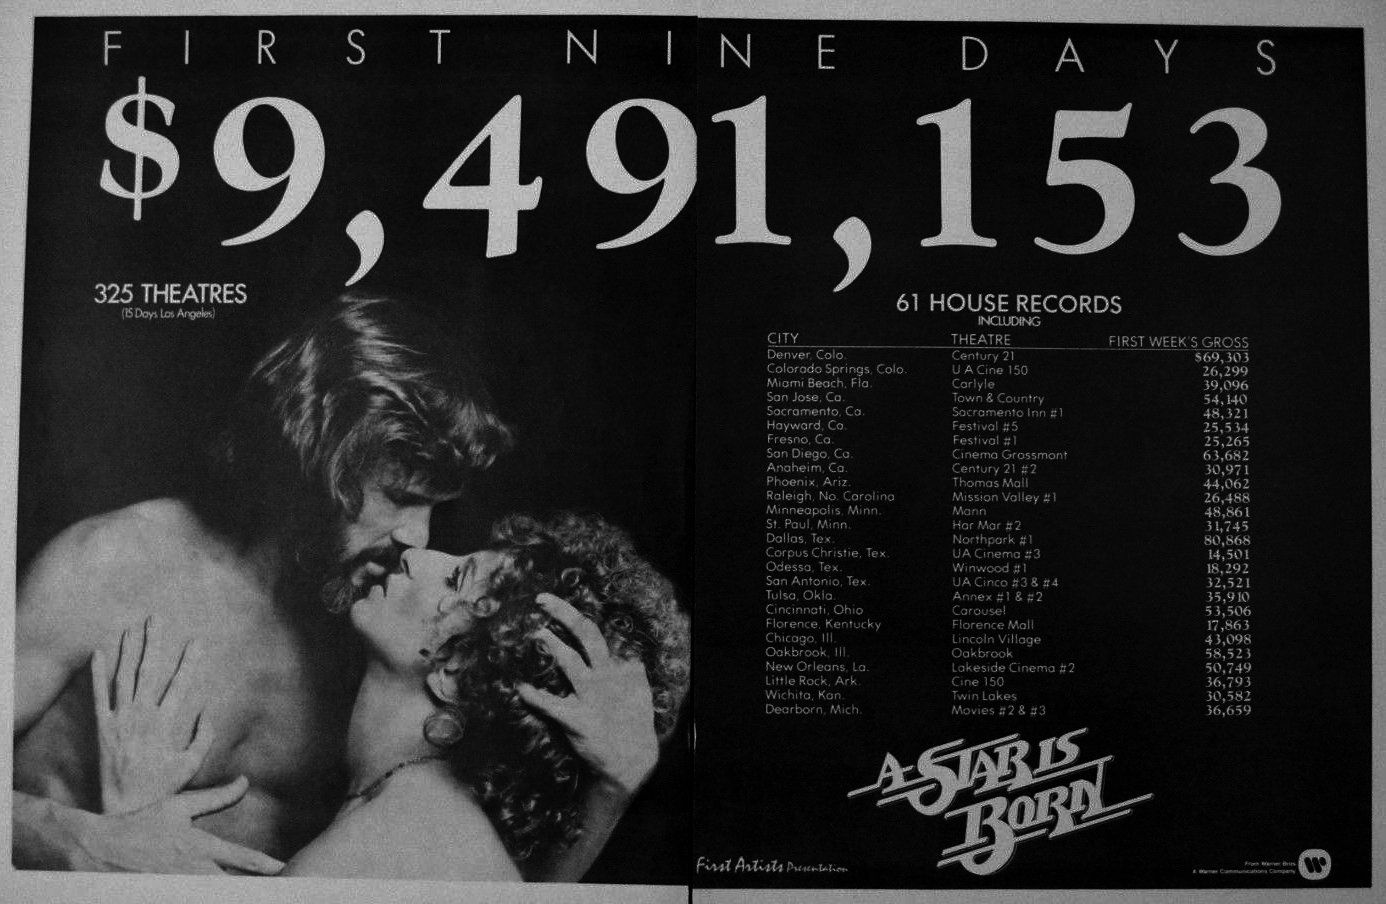 Industry ad touting that A Star Is Born earned $9.5 million in nine days.